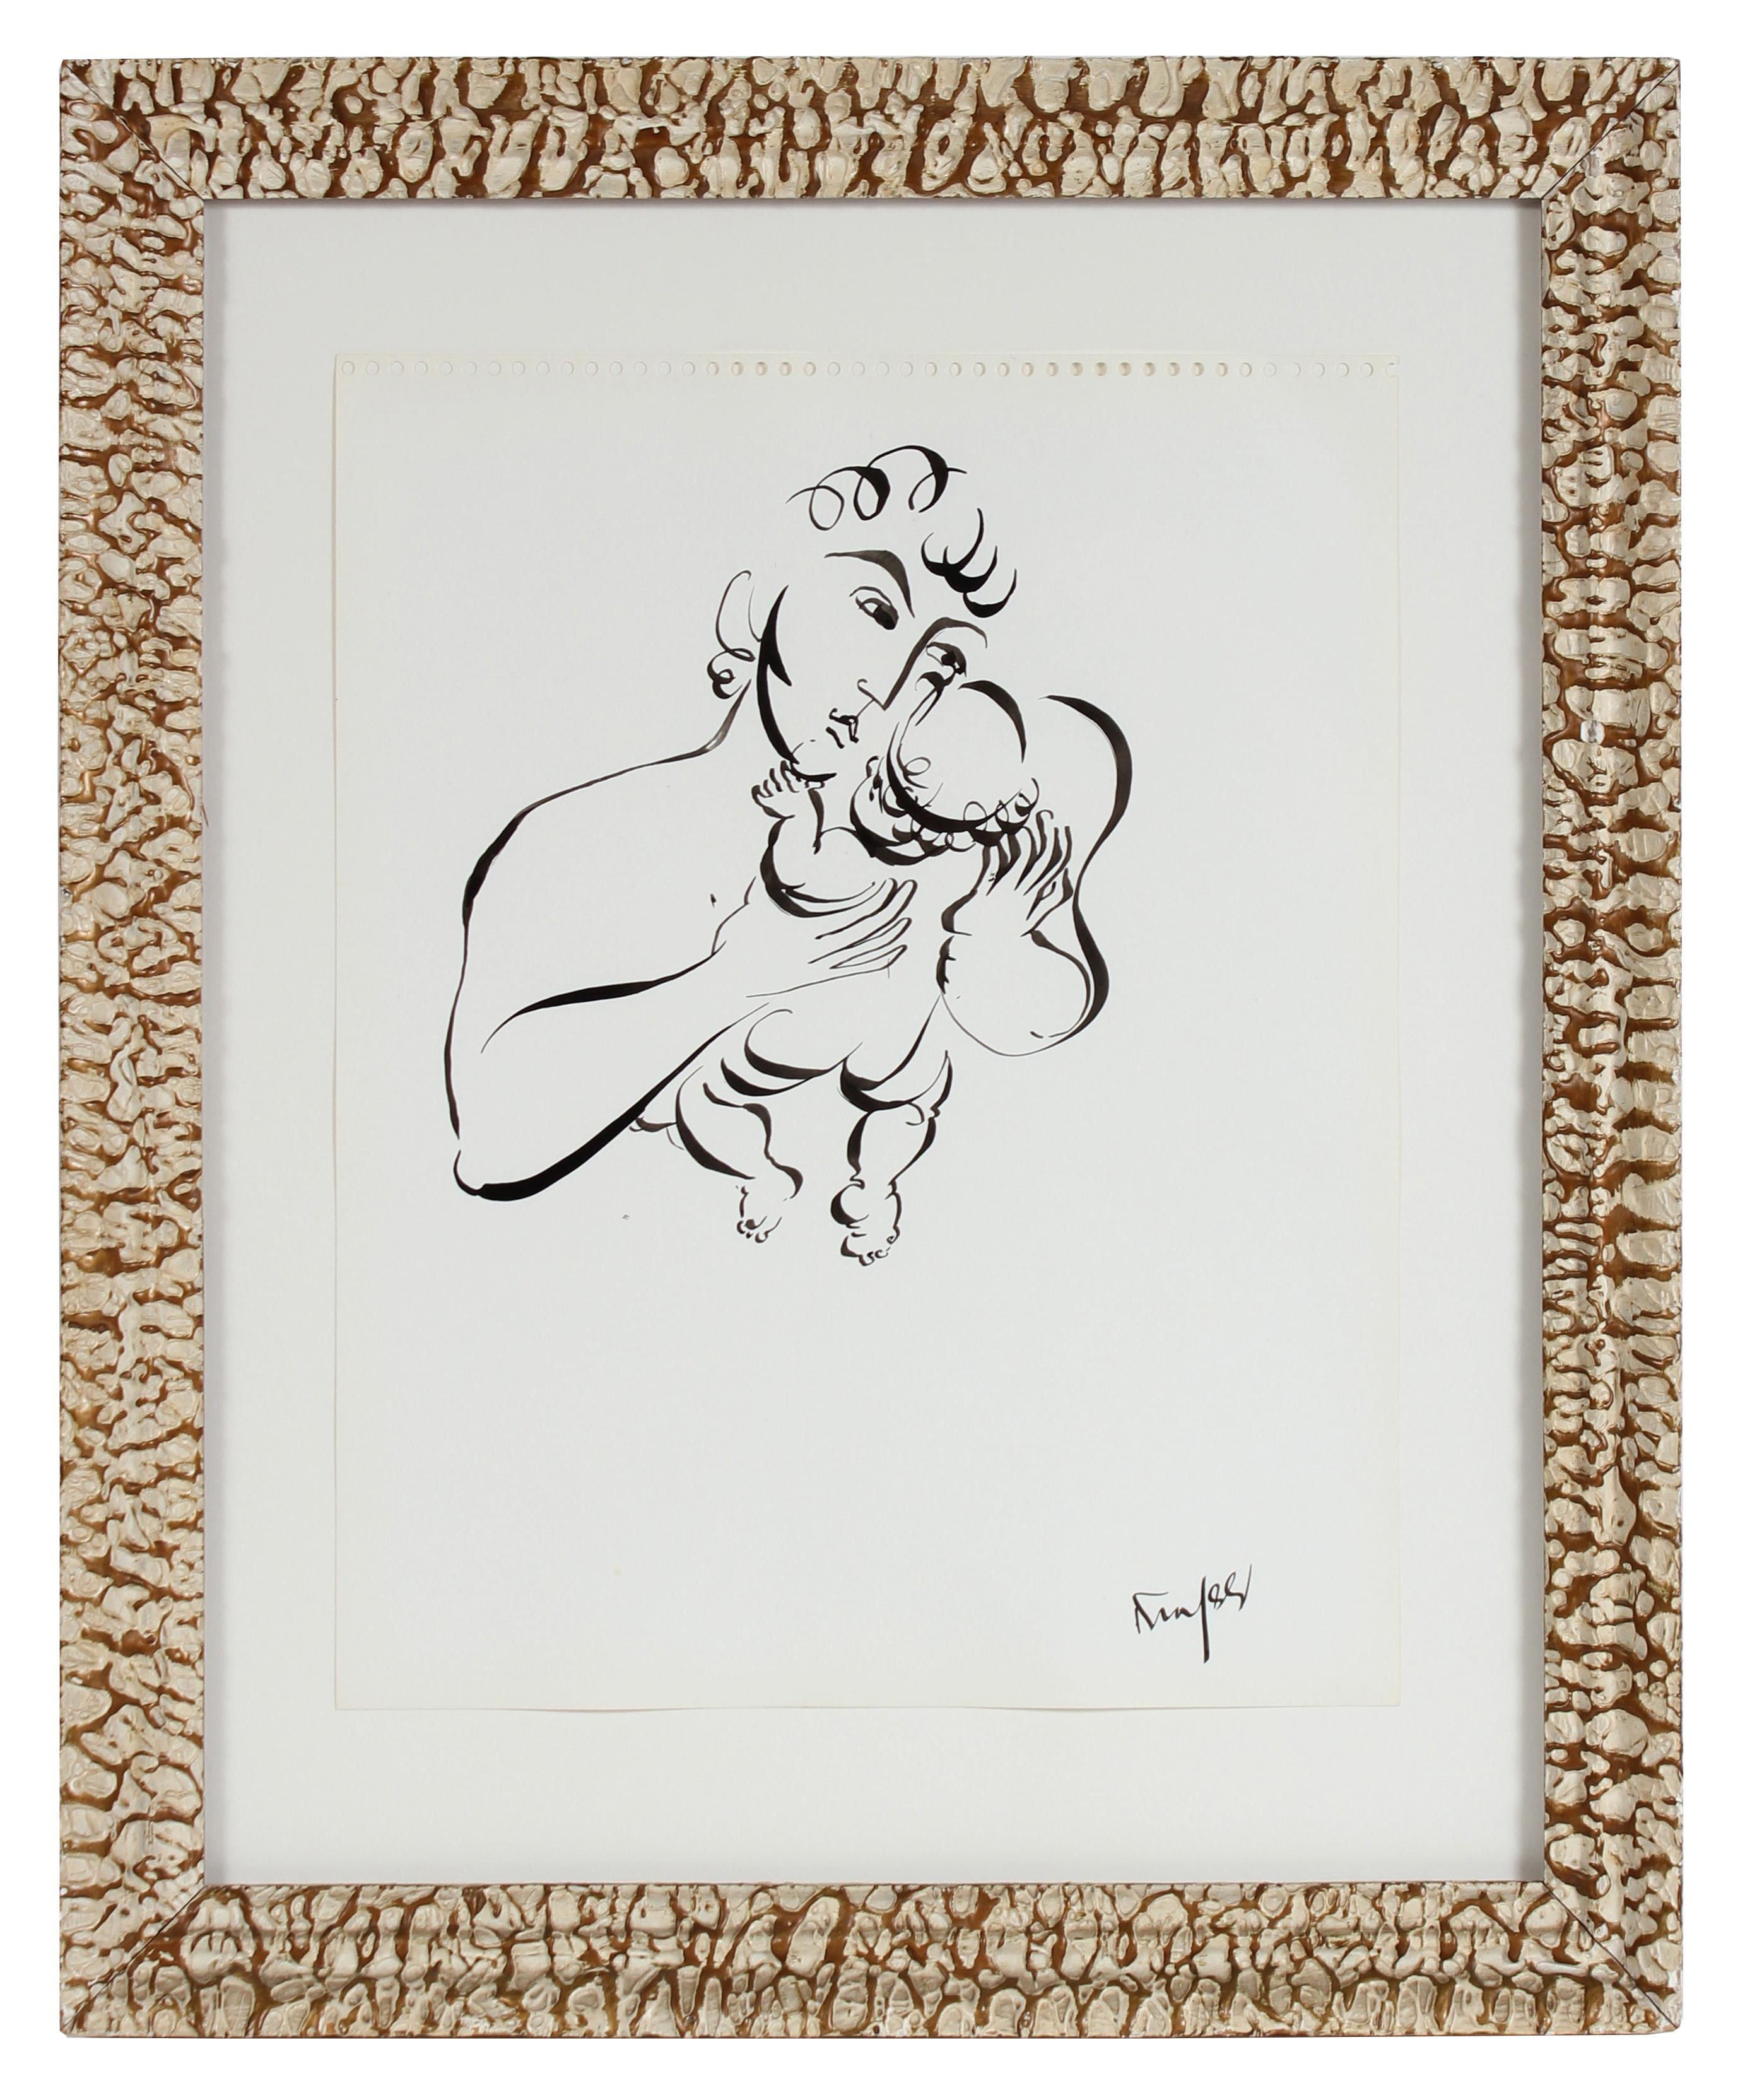 Morris Kronfeld Figurative Painting - Figurative Ink Drawing of Father Holding His Child 1970-80s 